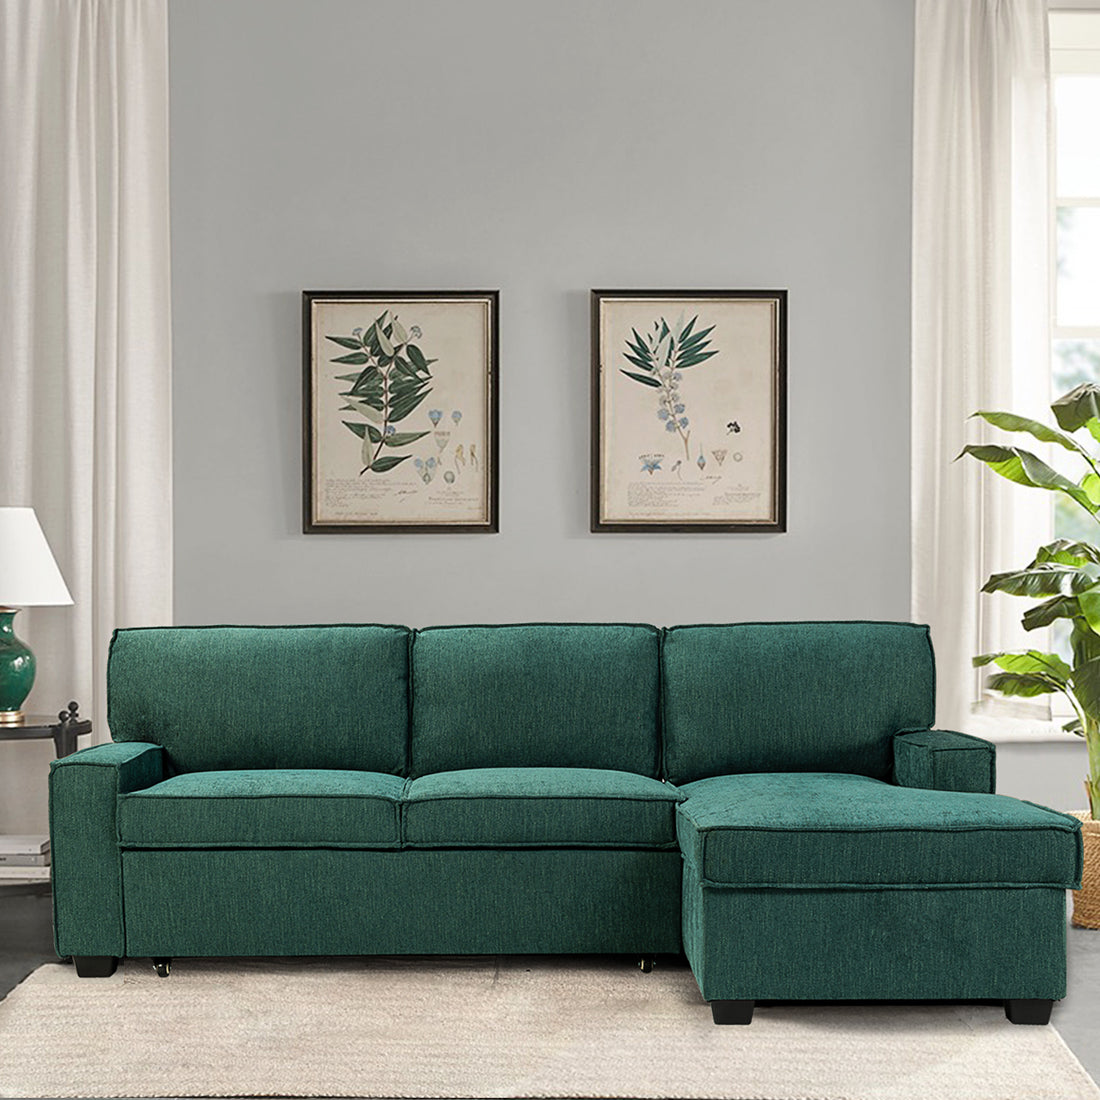 Roger Pull Out Sleeper Sectional Teal - Teal